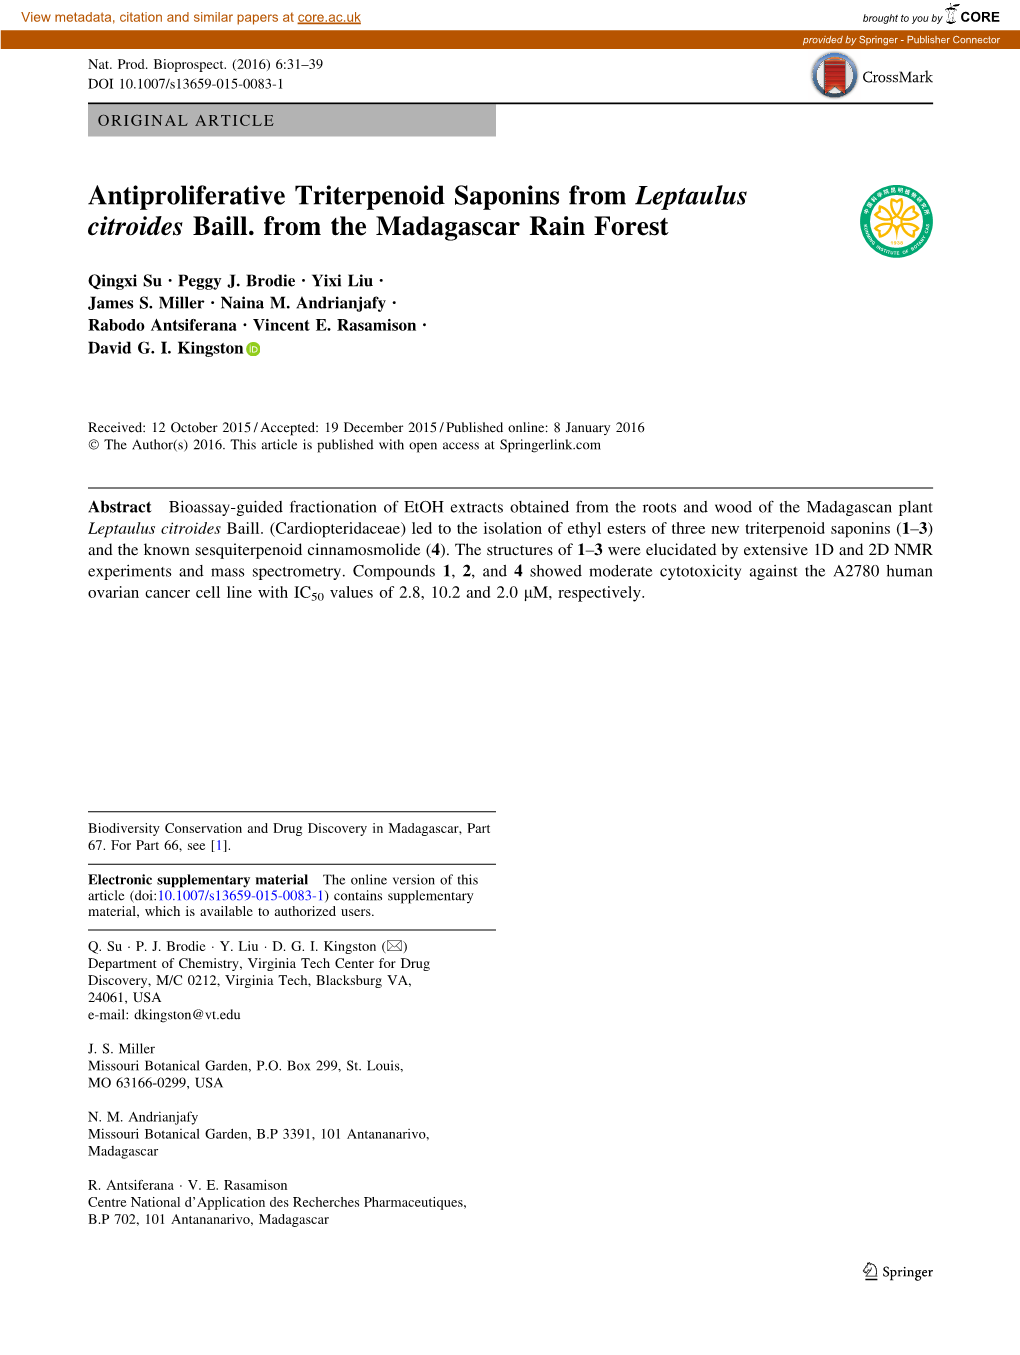 Antiproliferative Triterpenoid Saponins from Leptaulus Citroides Baill